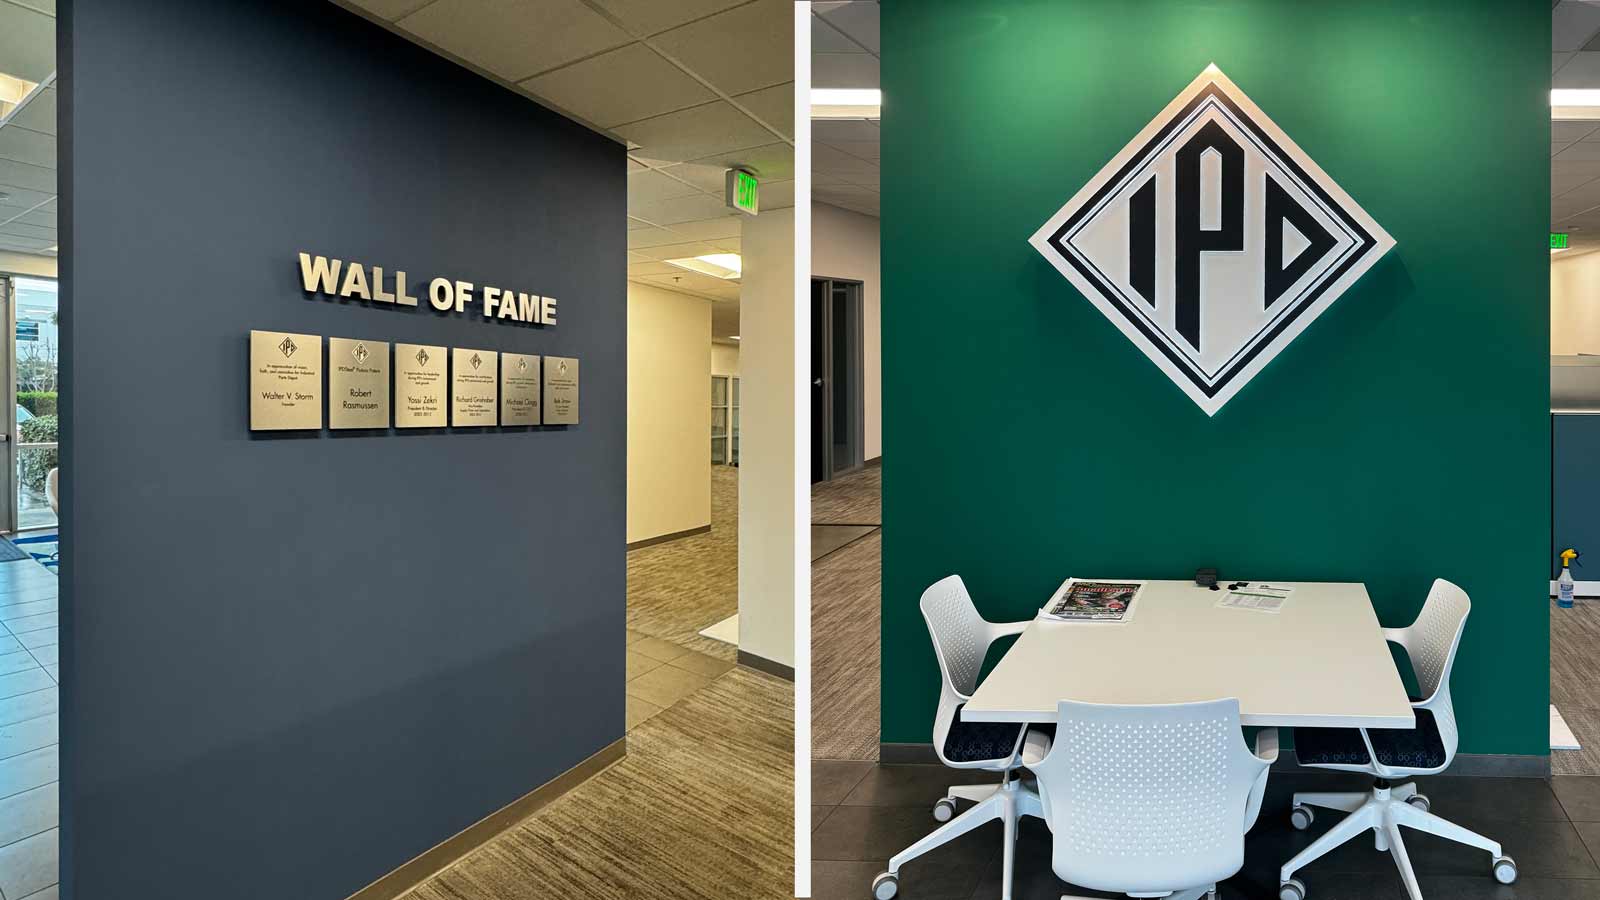 ipd office signs mounted on the indoor walls